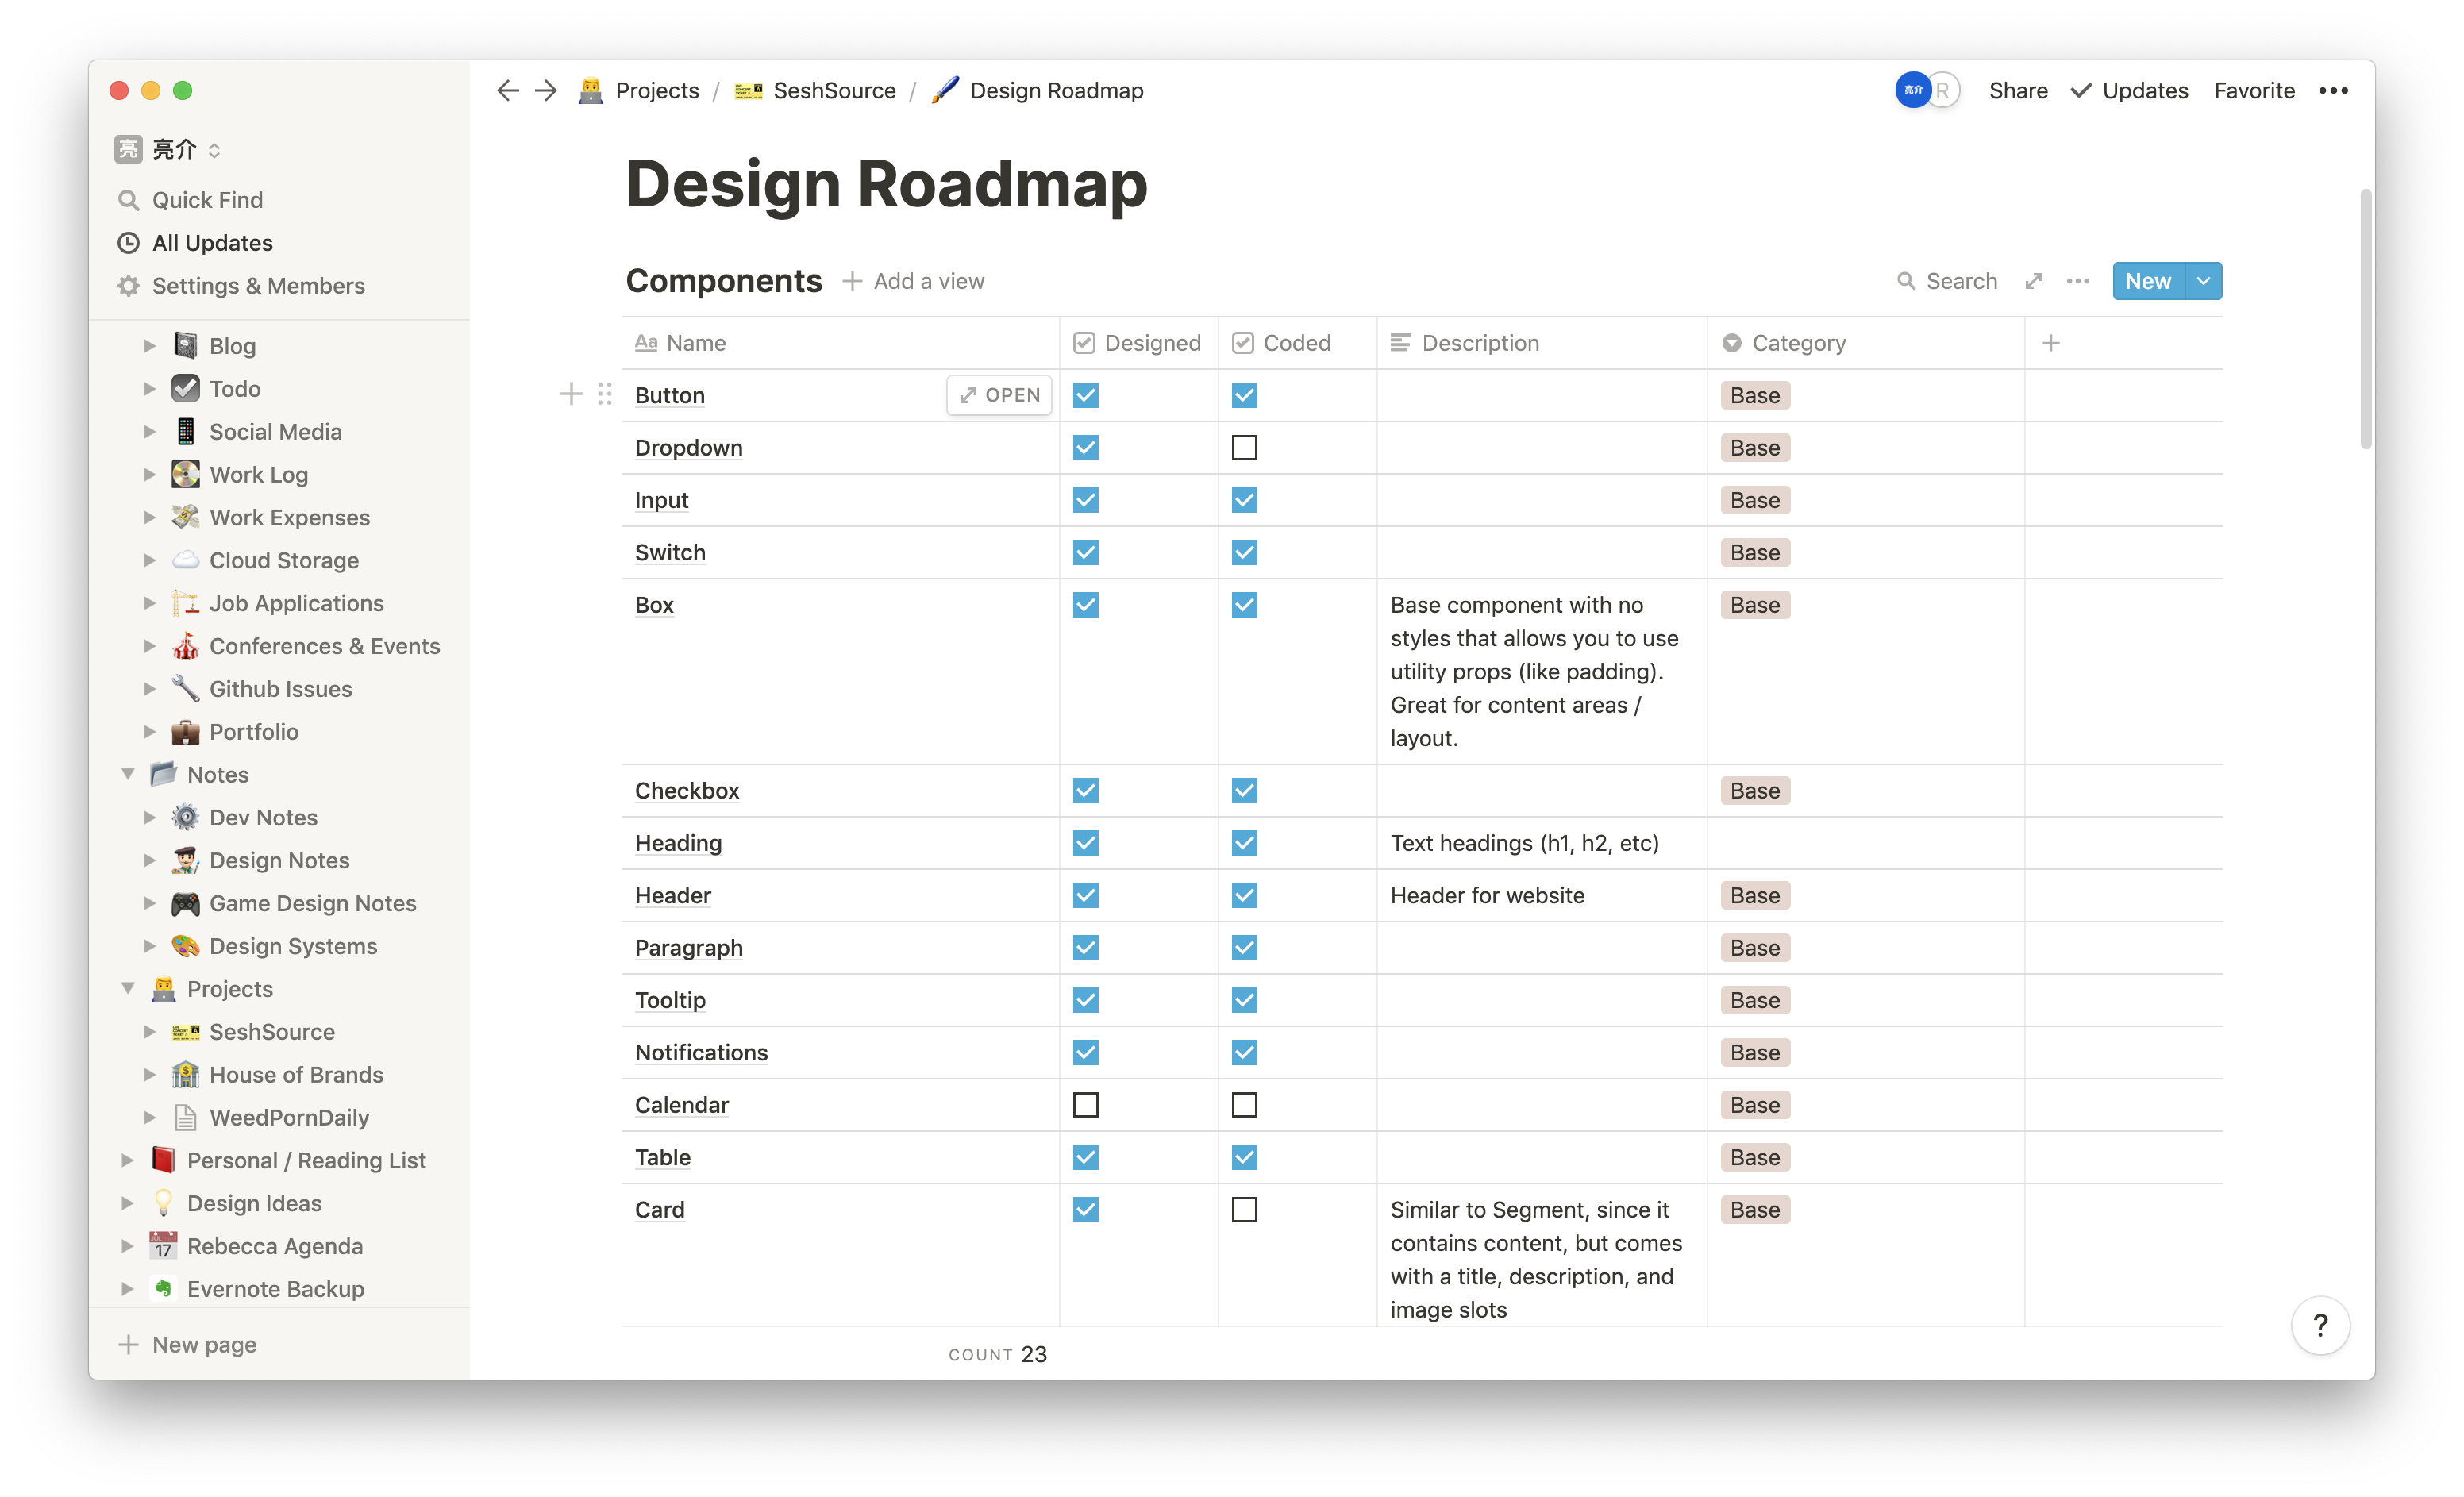 Screenshot of the Notion app on the Design Roadmap page with a table view containing a list of components to design